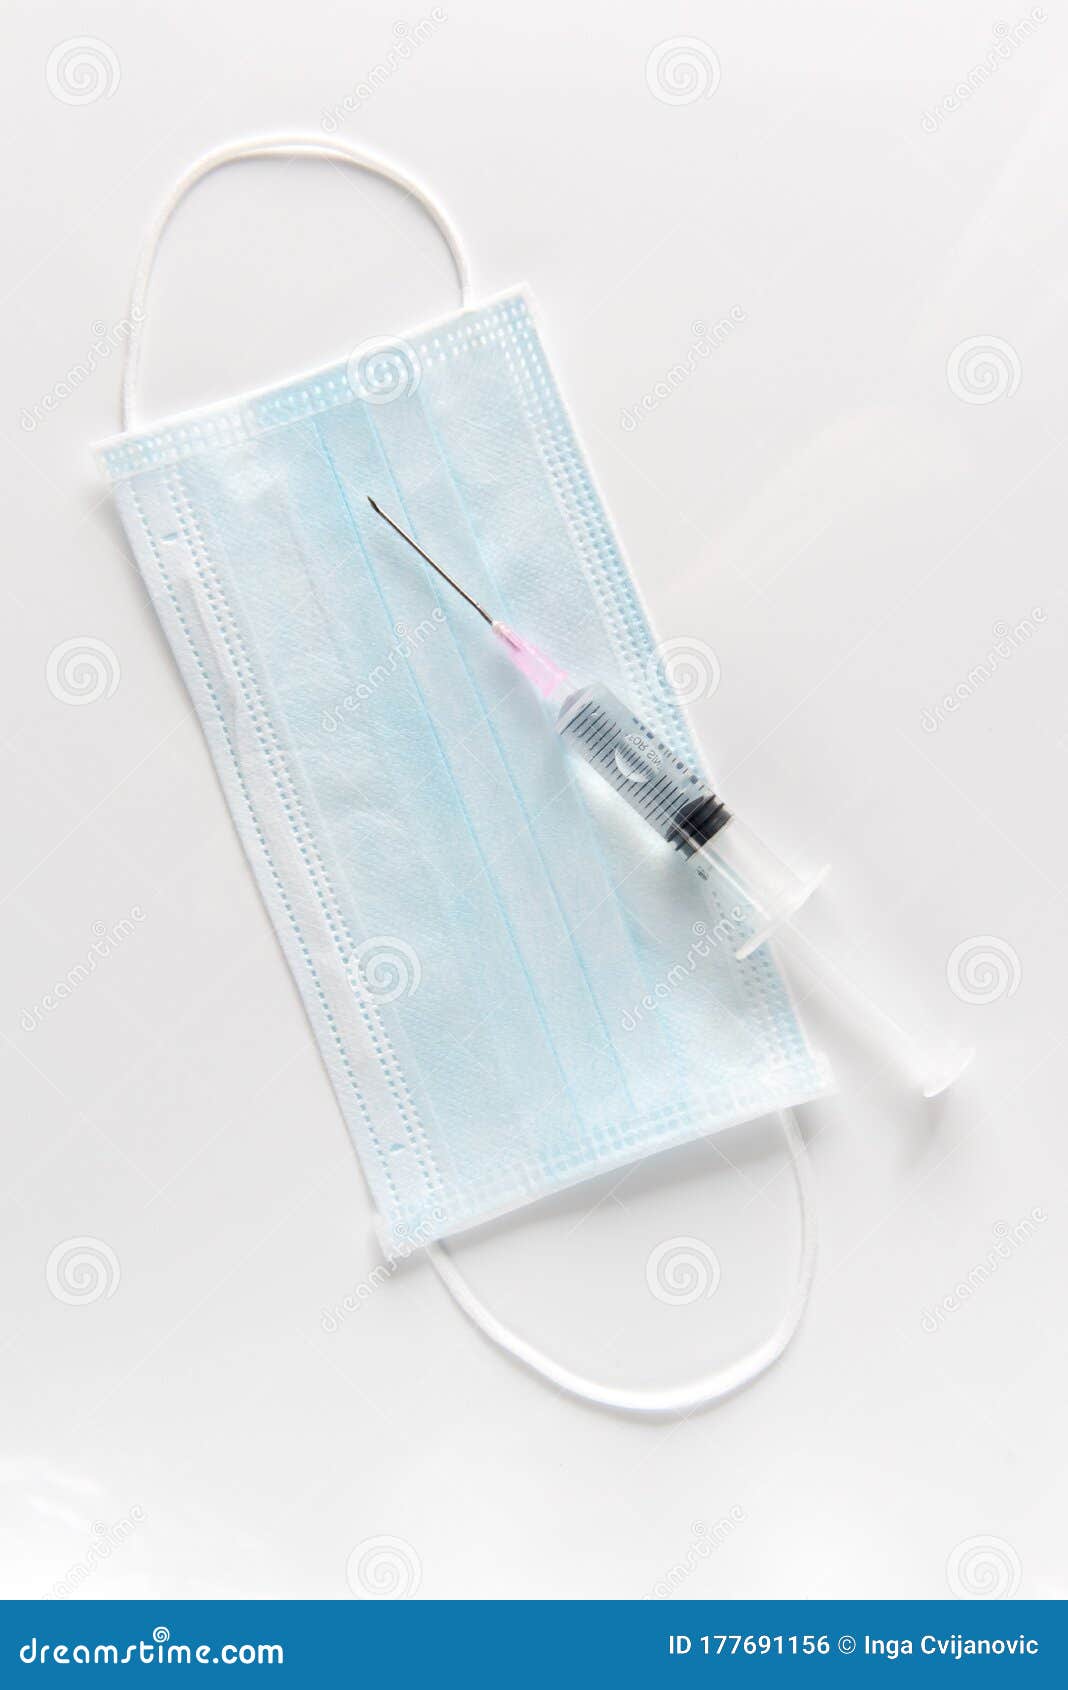 protective surgical mask, syringe on a white table